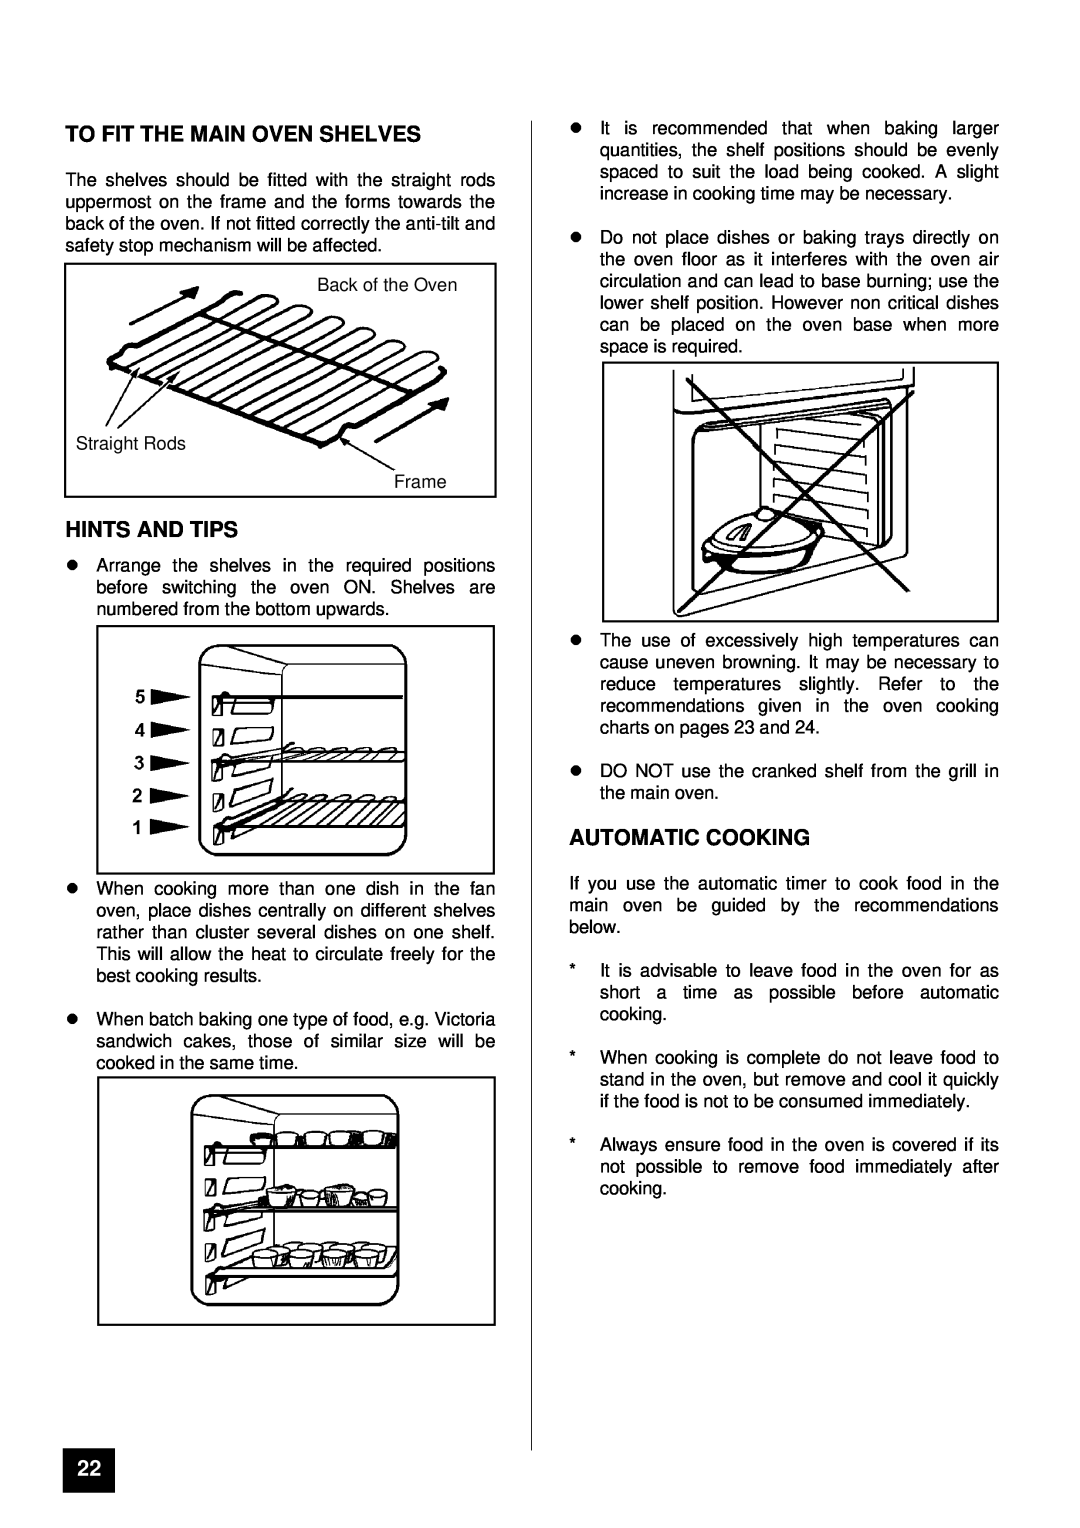 Tricity Bendix SI 452 installation instructions To Fit The Main Oven Shelves, lHINTS AND TIPS, Automatic Cooking 